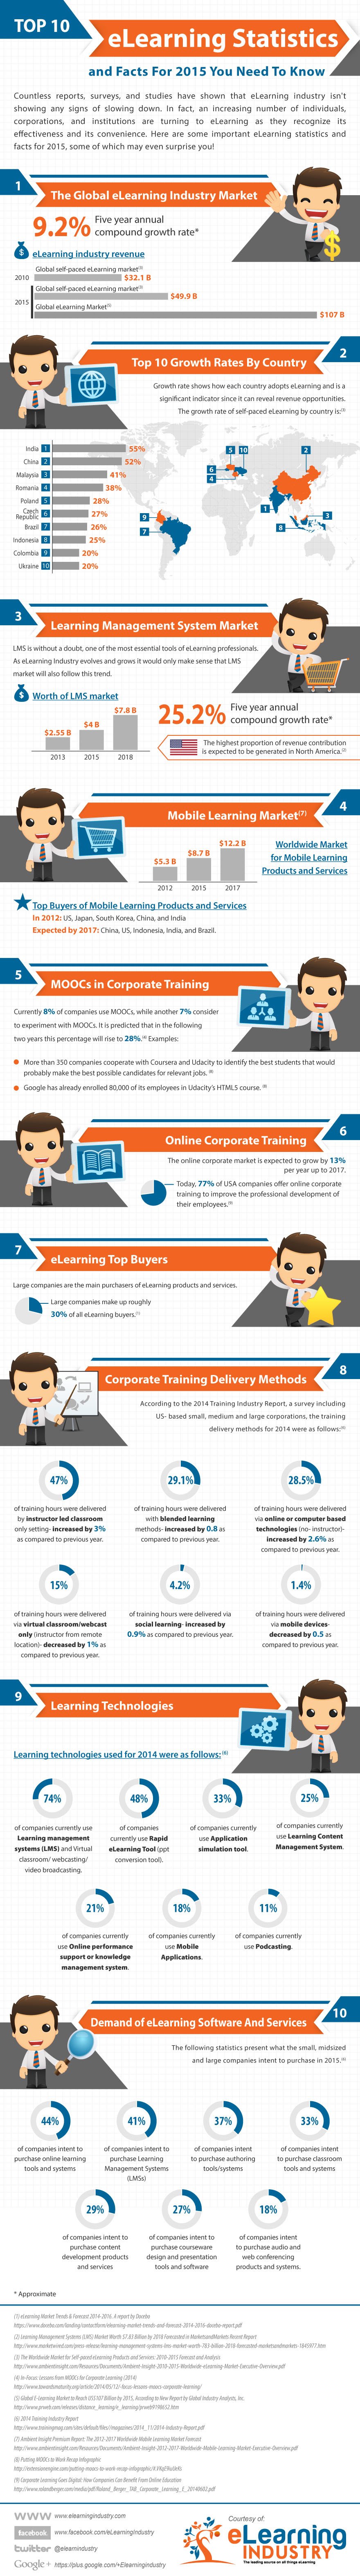 2015 - top 10 elearning stats